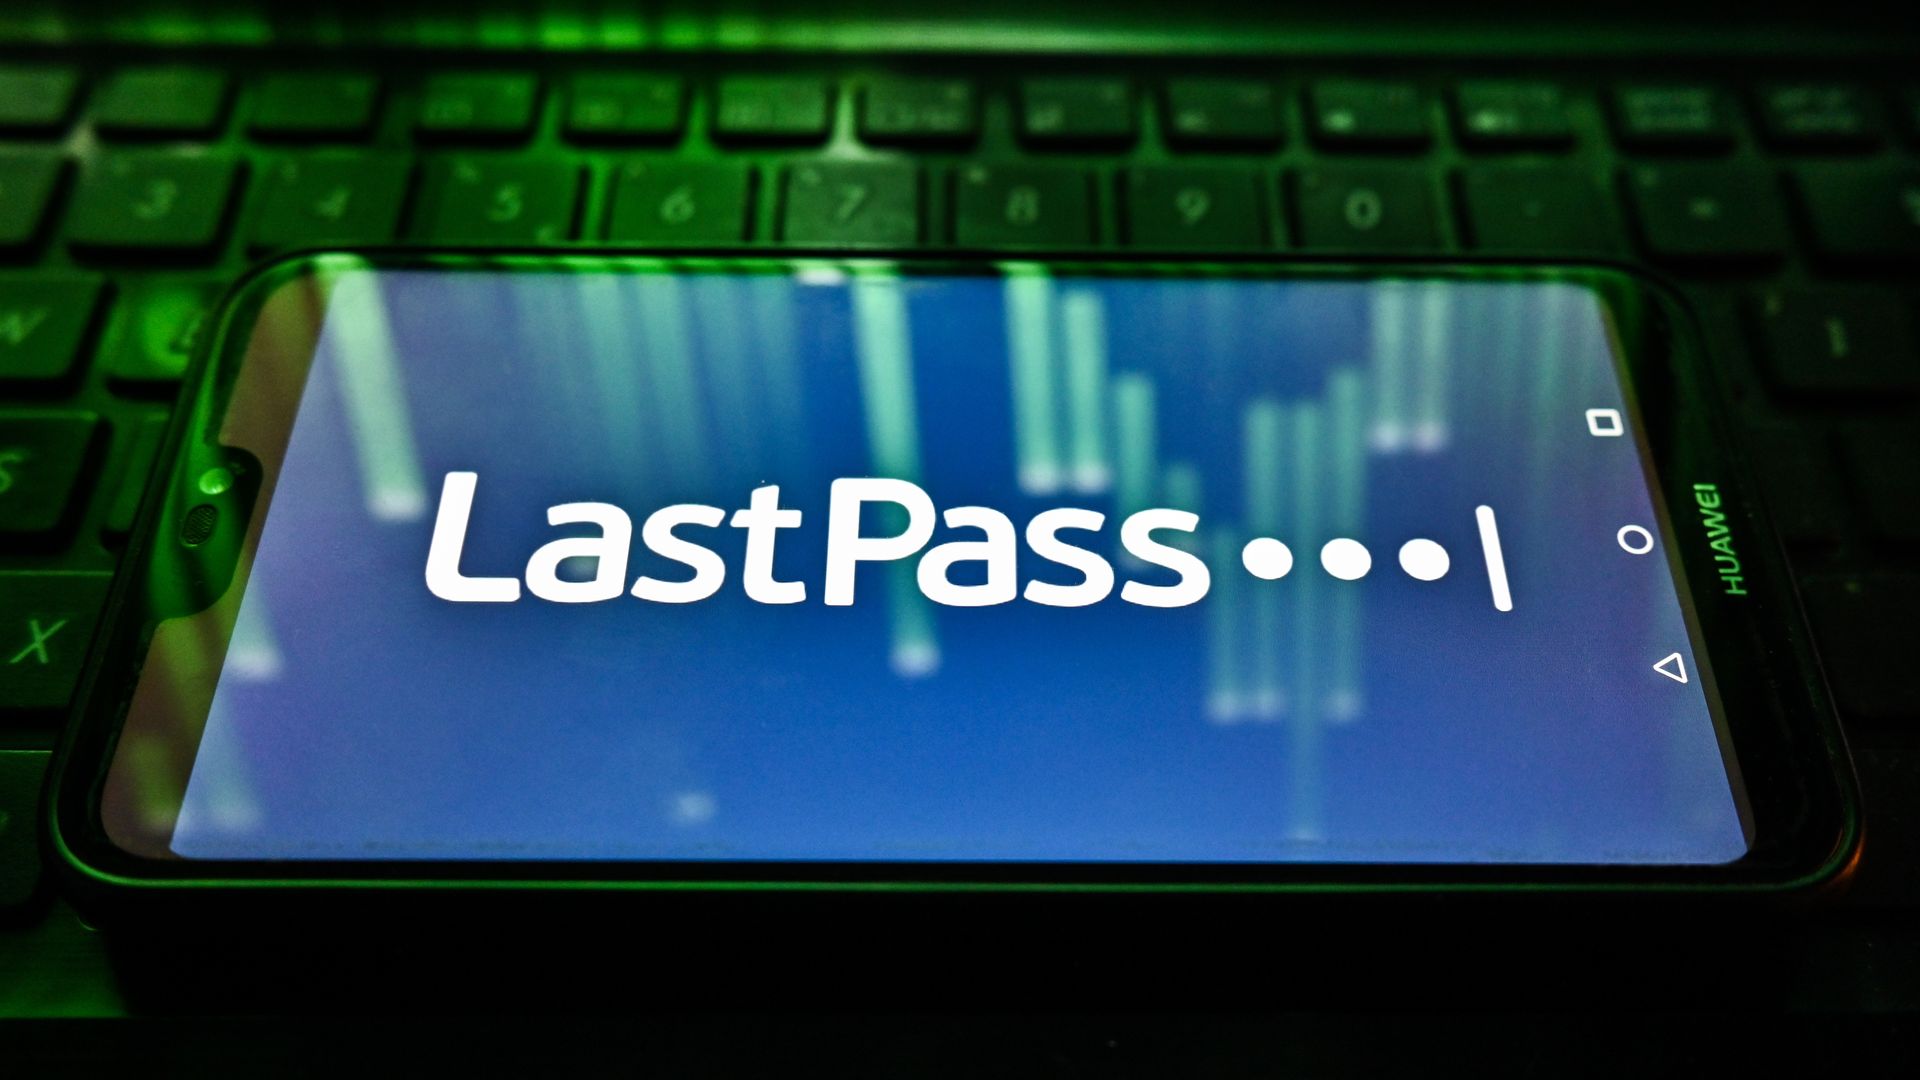 Image of the LastPass logo on a phone screen